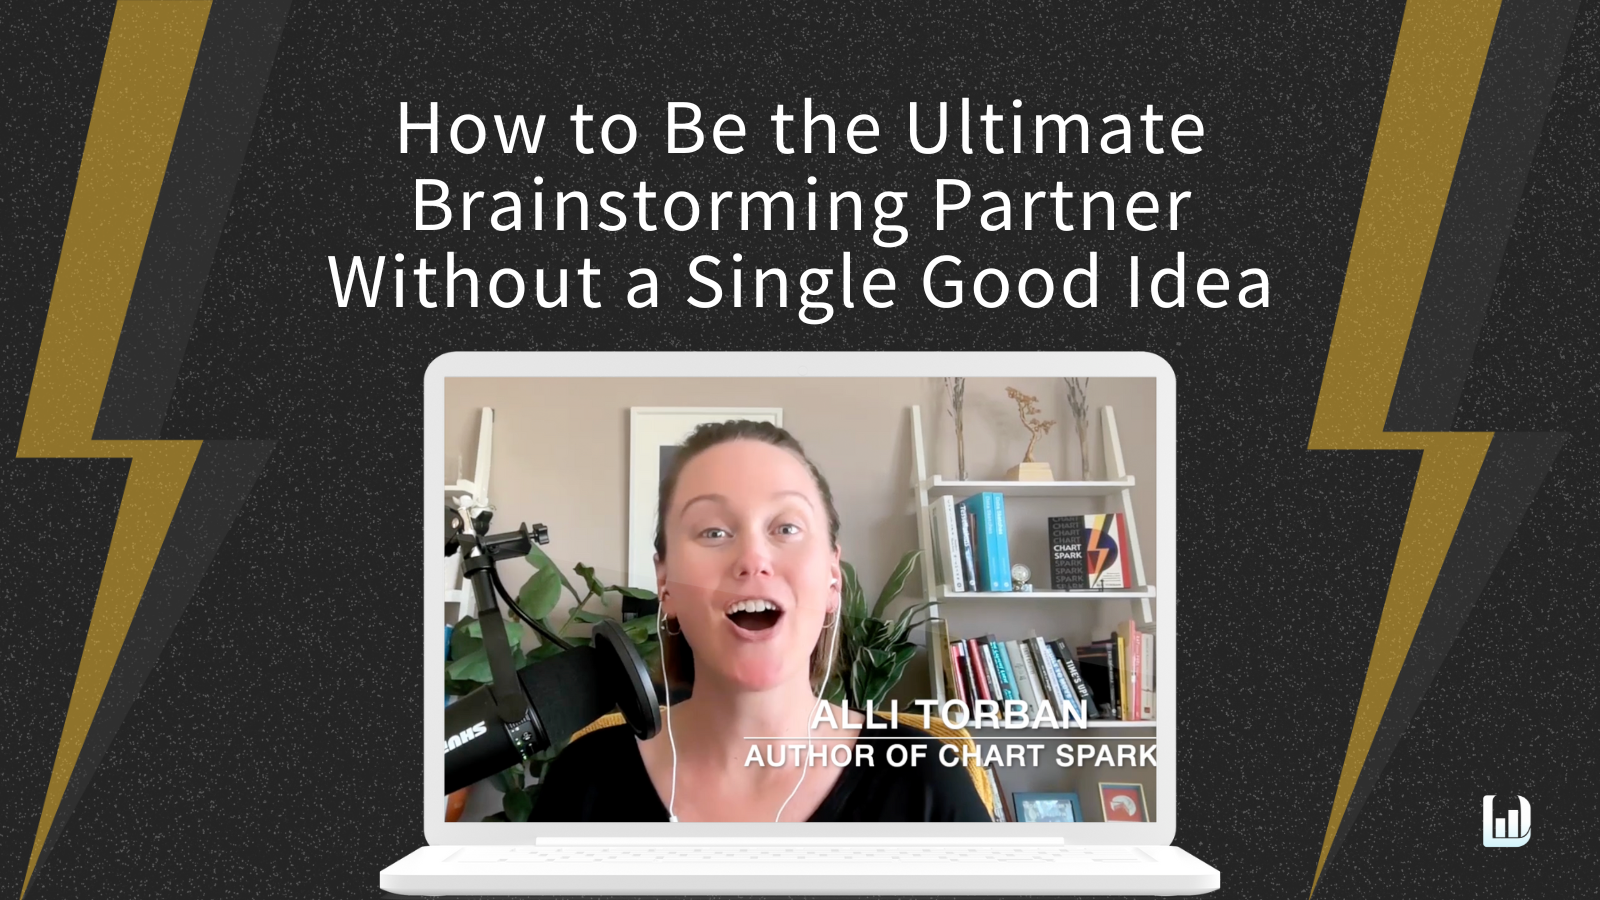 How to Be the Ultimate Brainstorming Partner Without a Single Good Idea